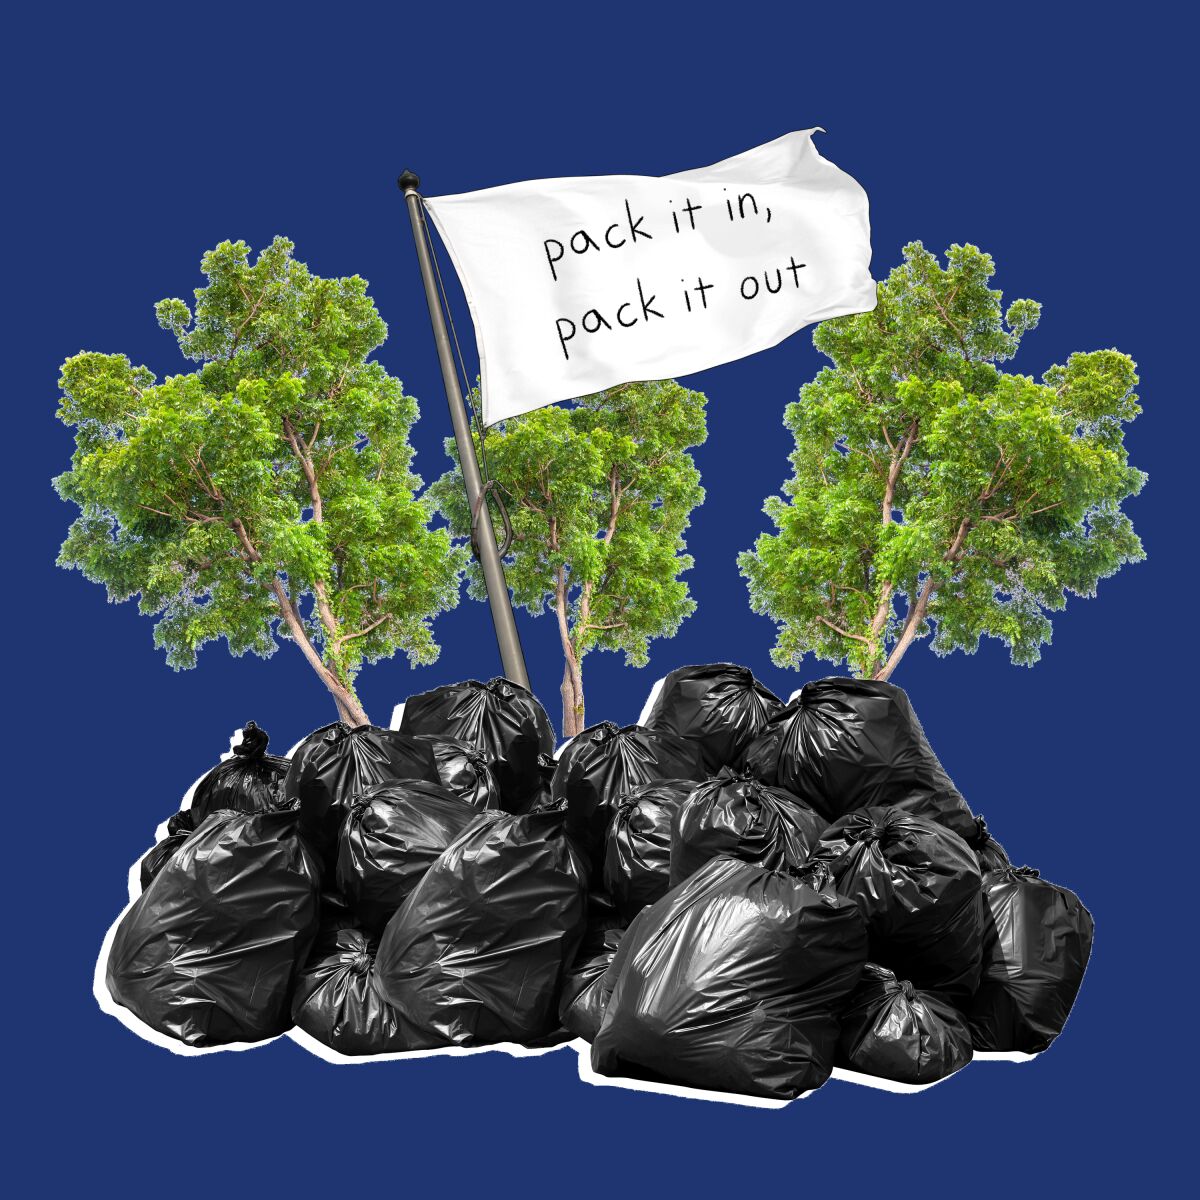 An illustration showing garbage bags at the foot of trees.